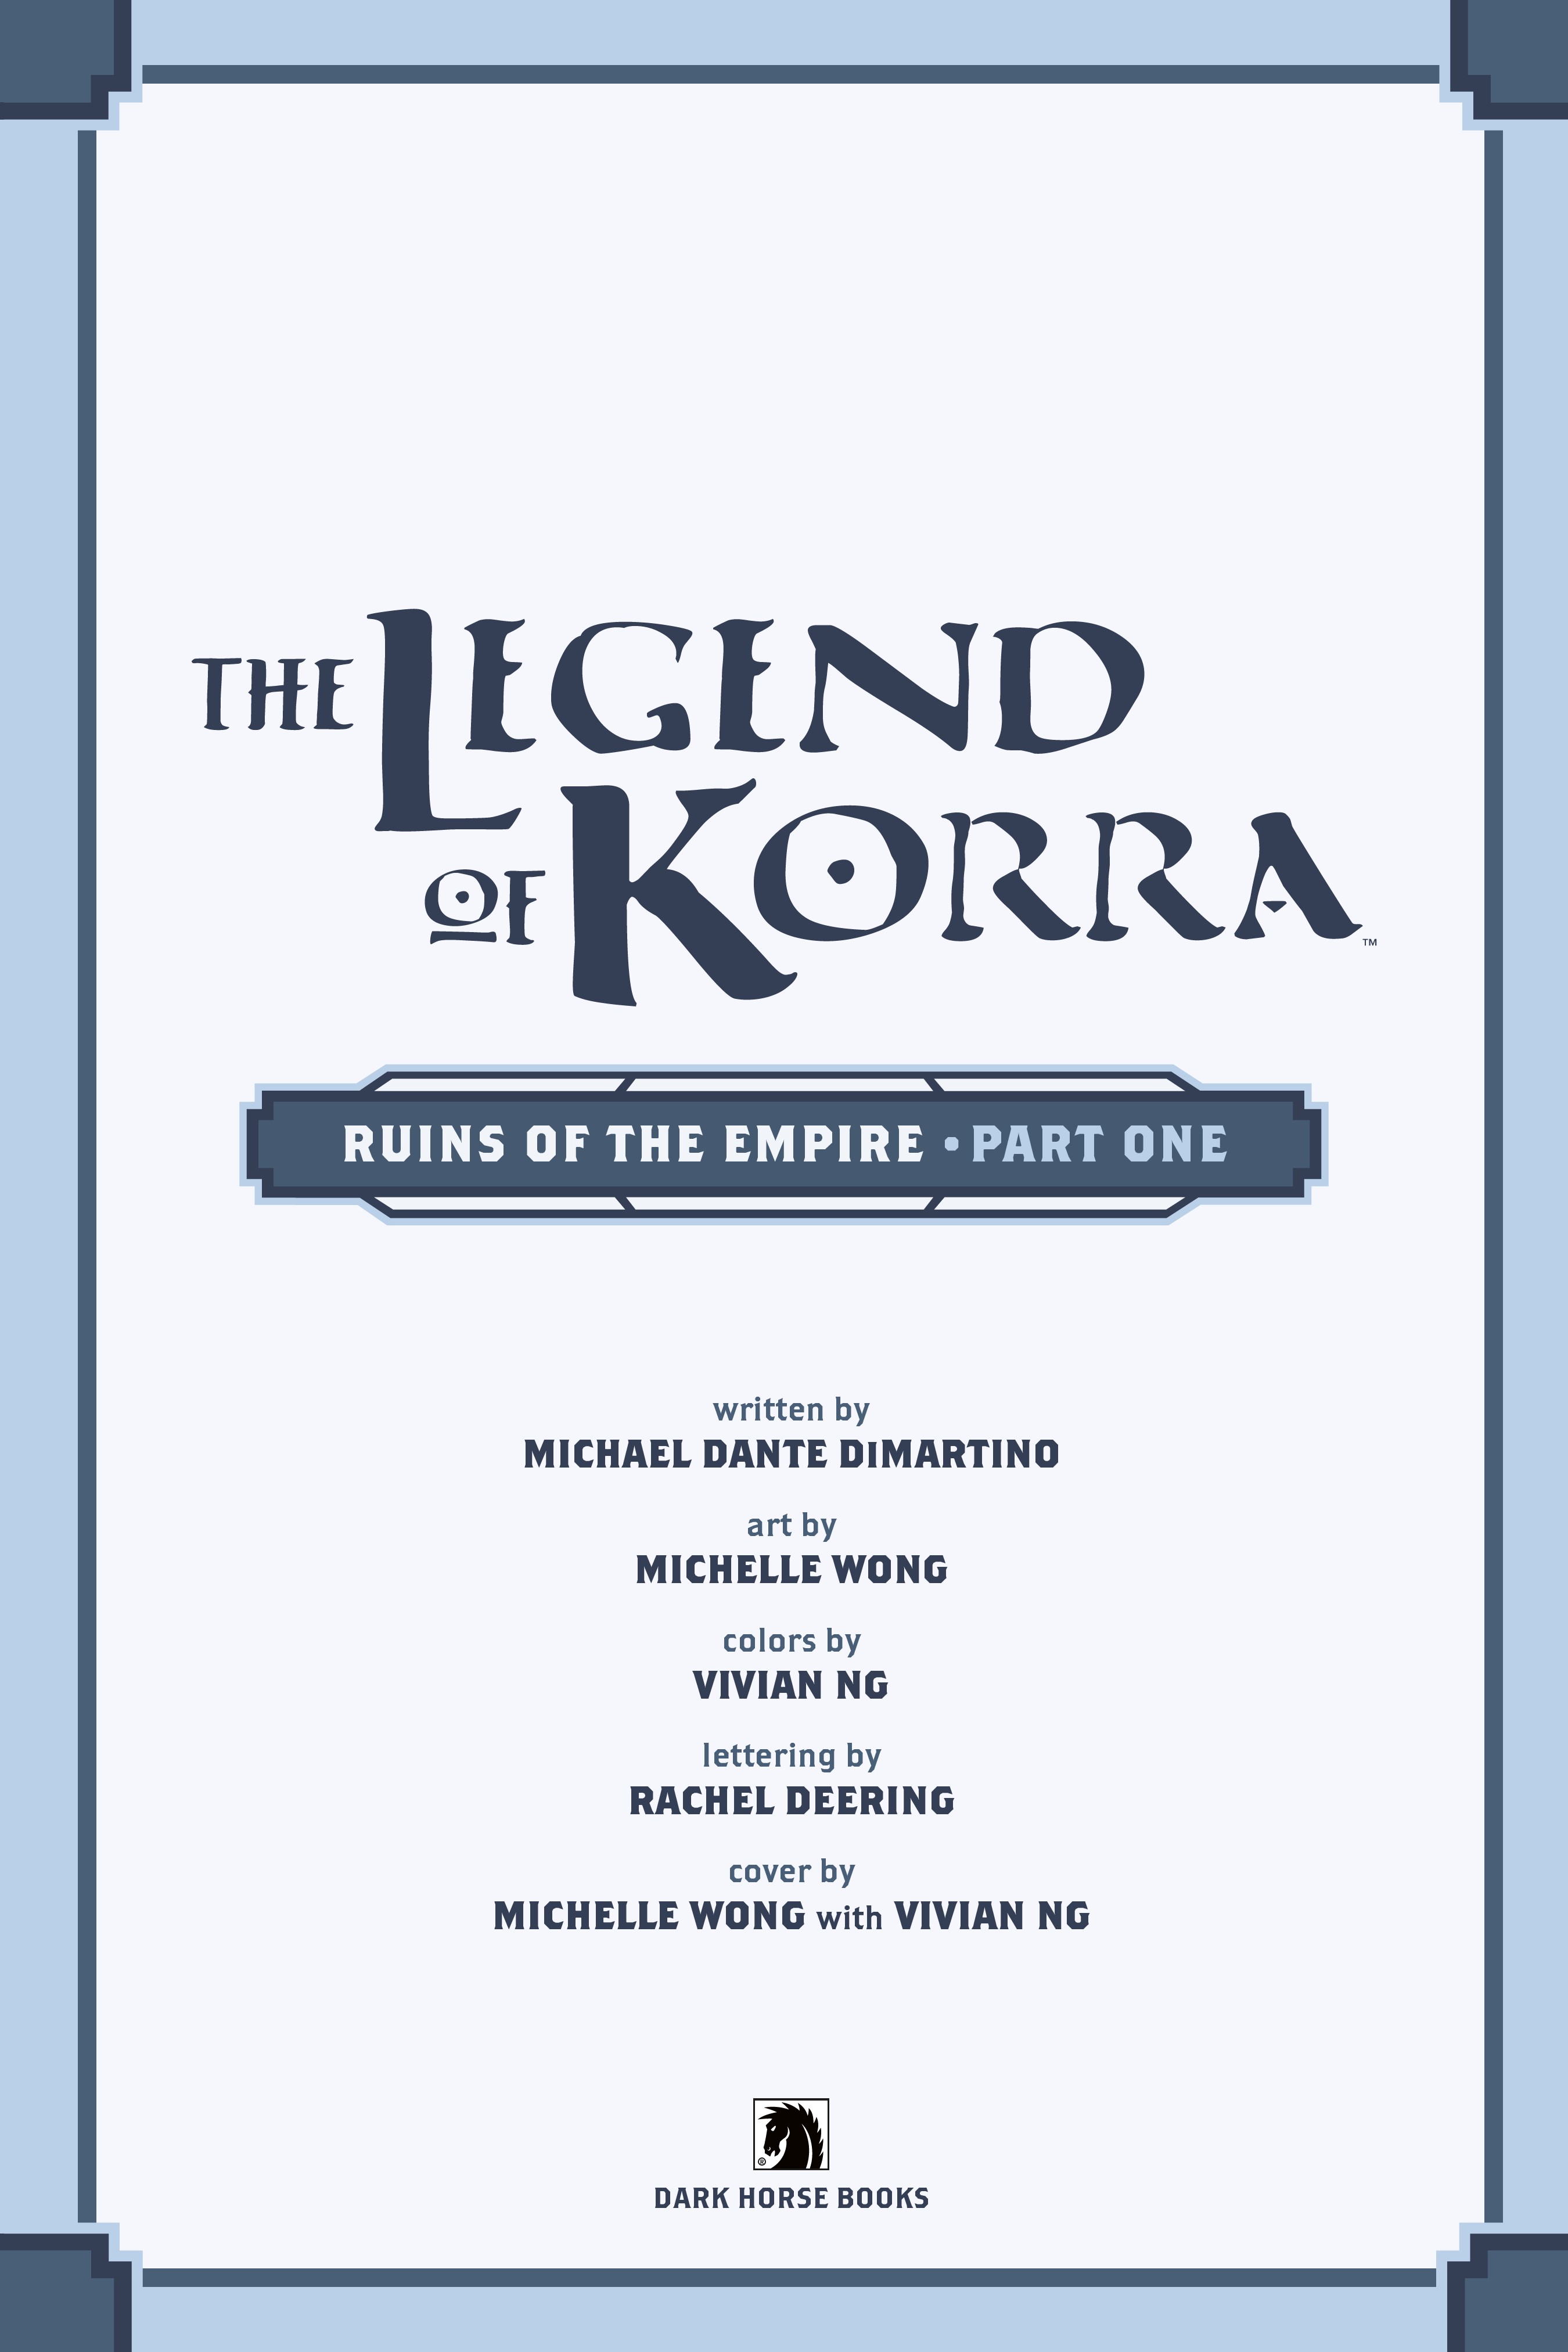 Read online Nickelodeon The Legend of Korra: Ruins of the Empire comic -  Issue # TPB 1 - 4